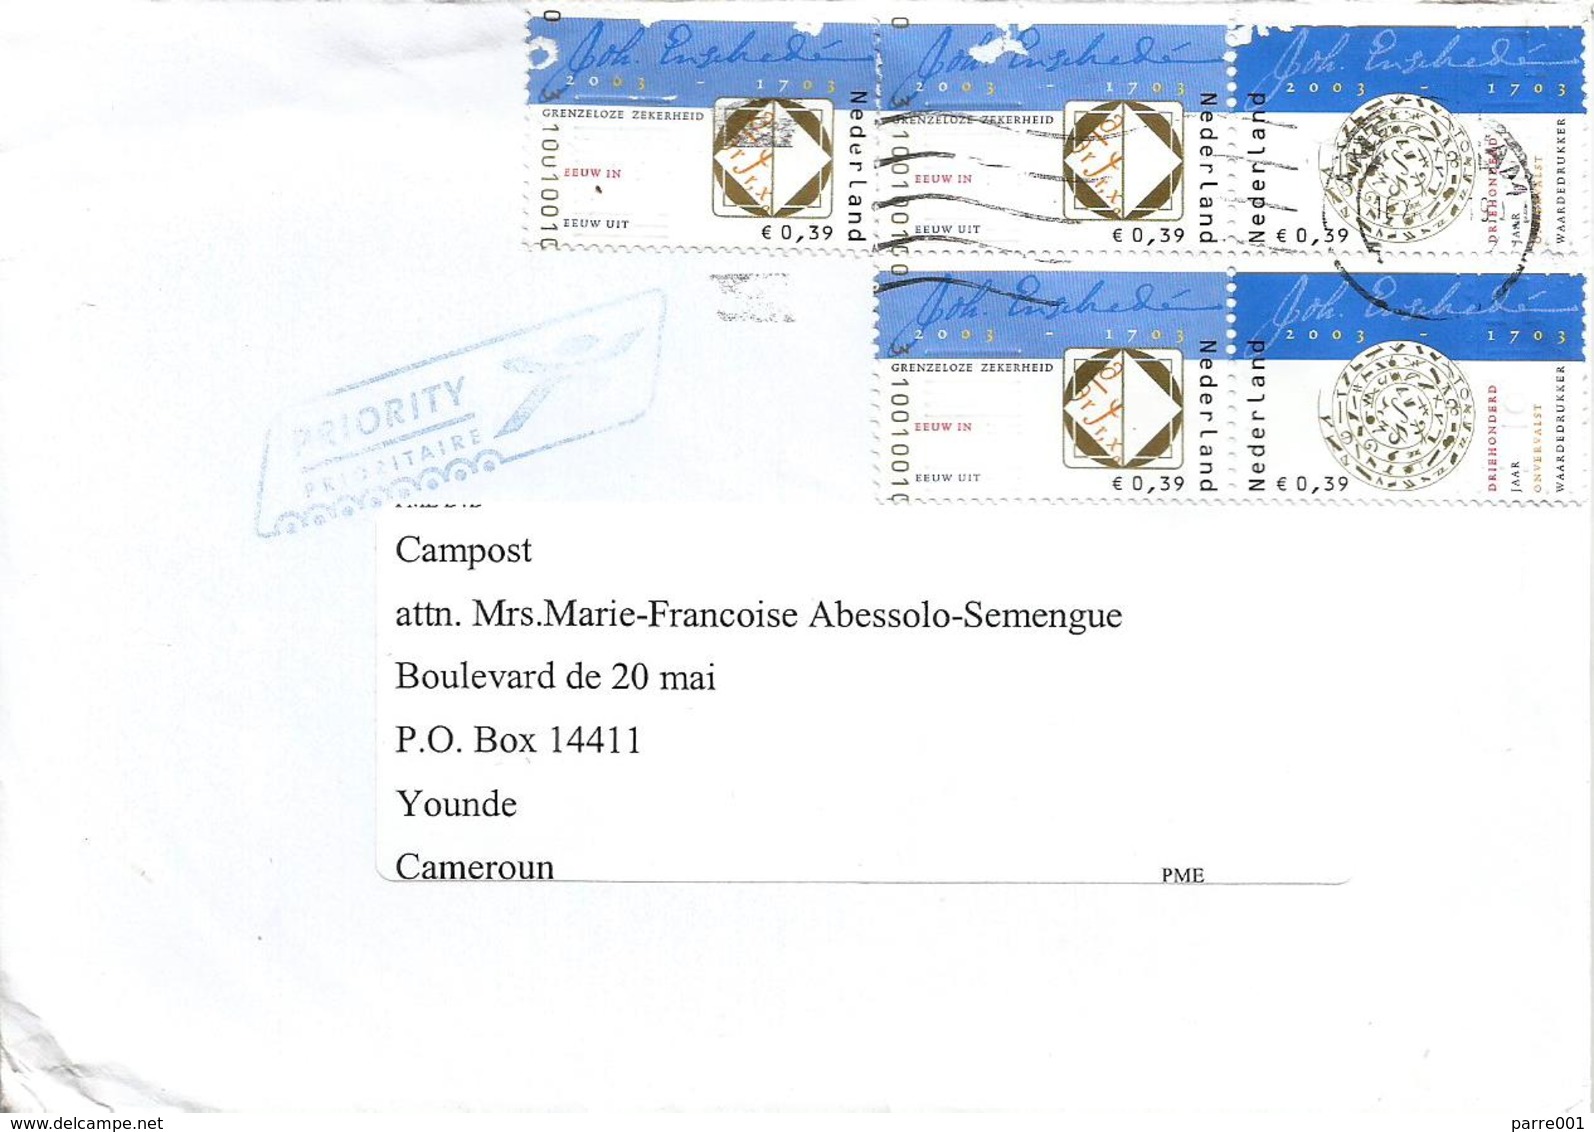 Nederland Netherlands 2010 Amsterdam Royal Joh. Enschedé Printers Xmas Cover To Cameroun - Covers & Documents